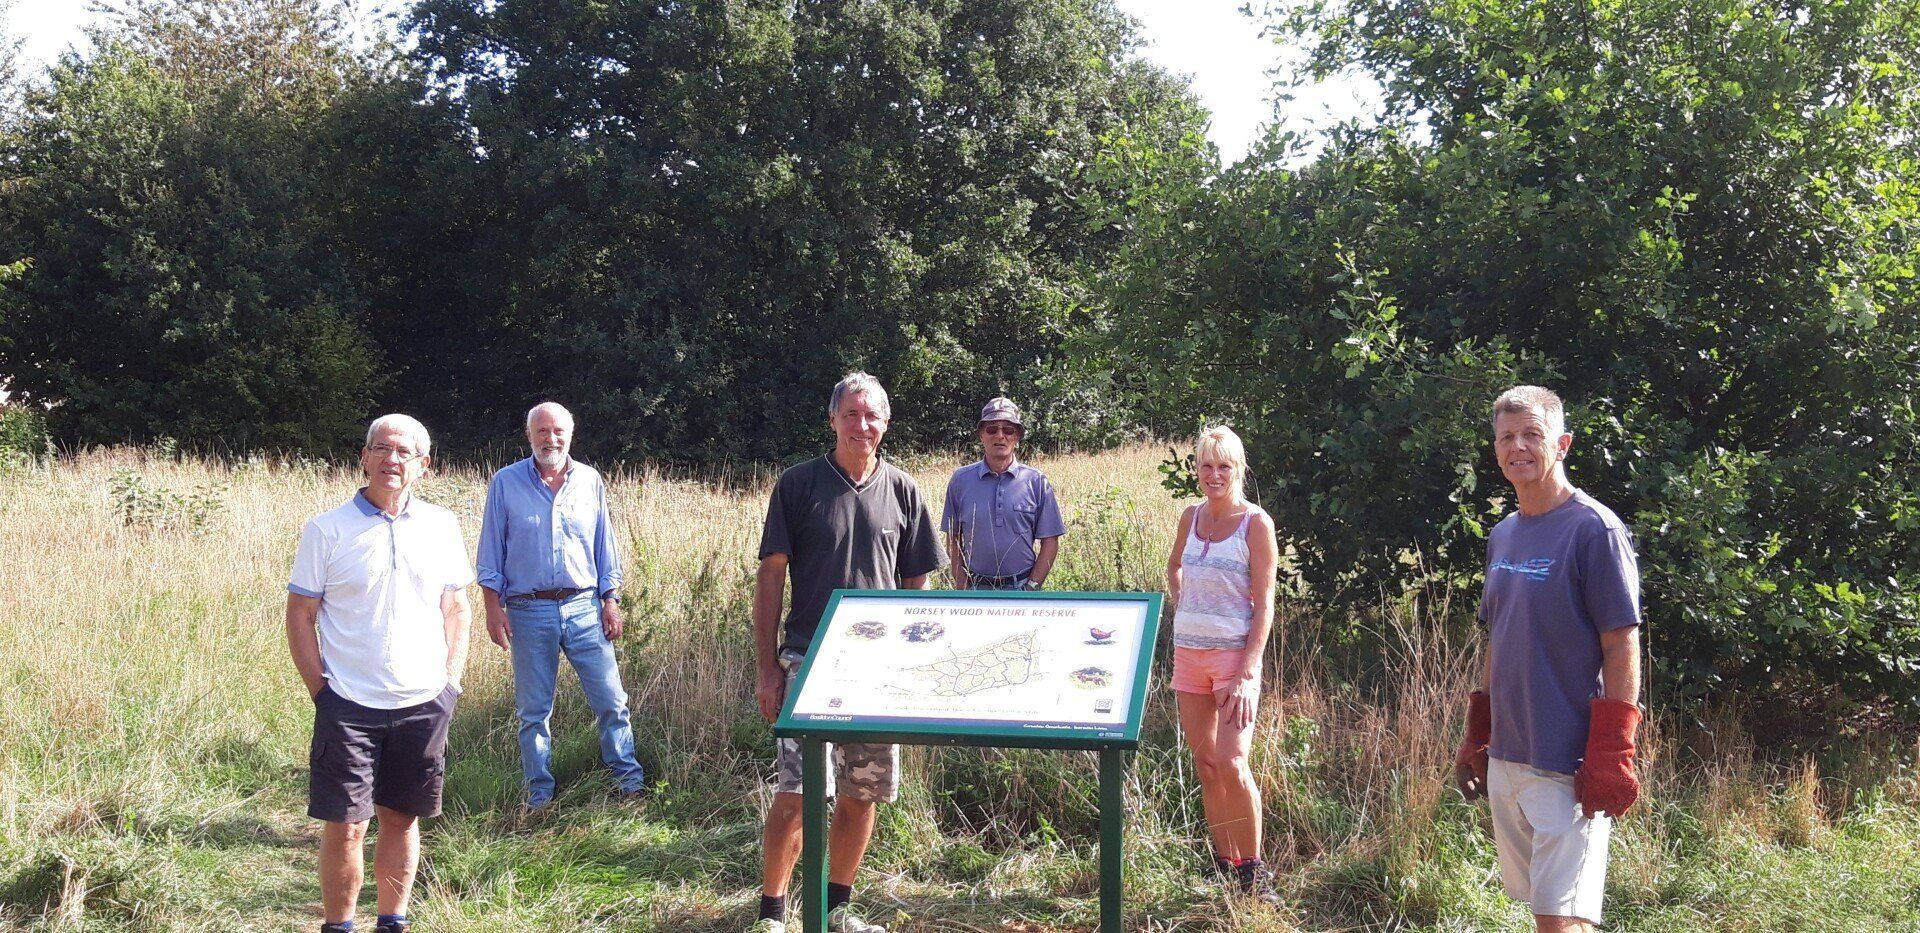 Norsey Wood work party with information boards